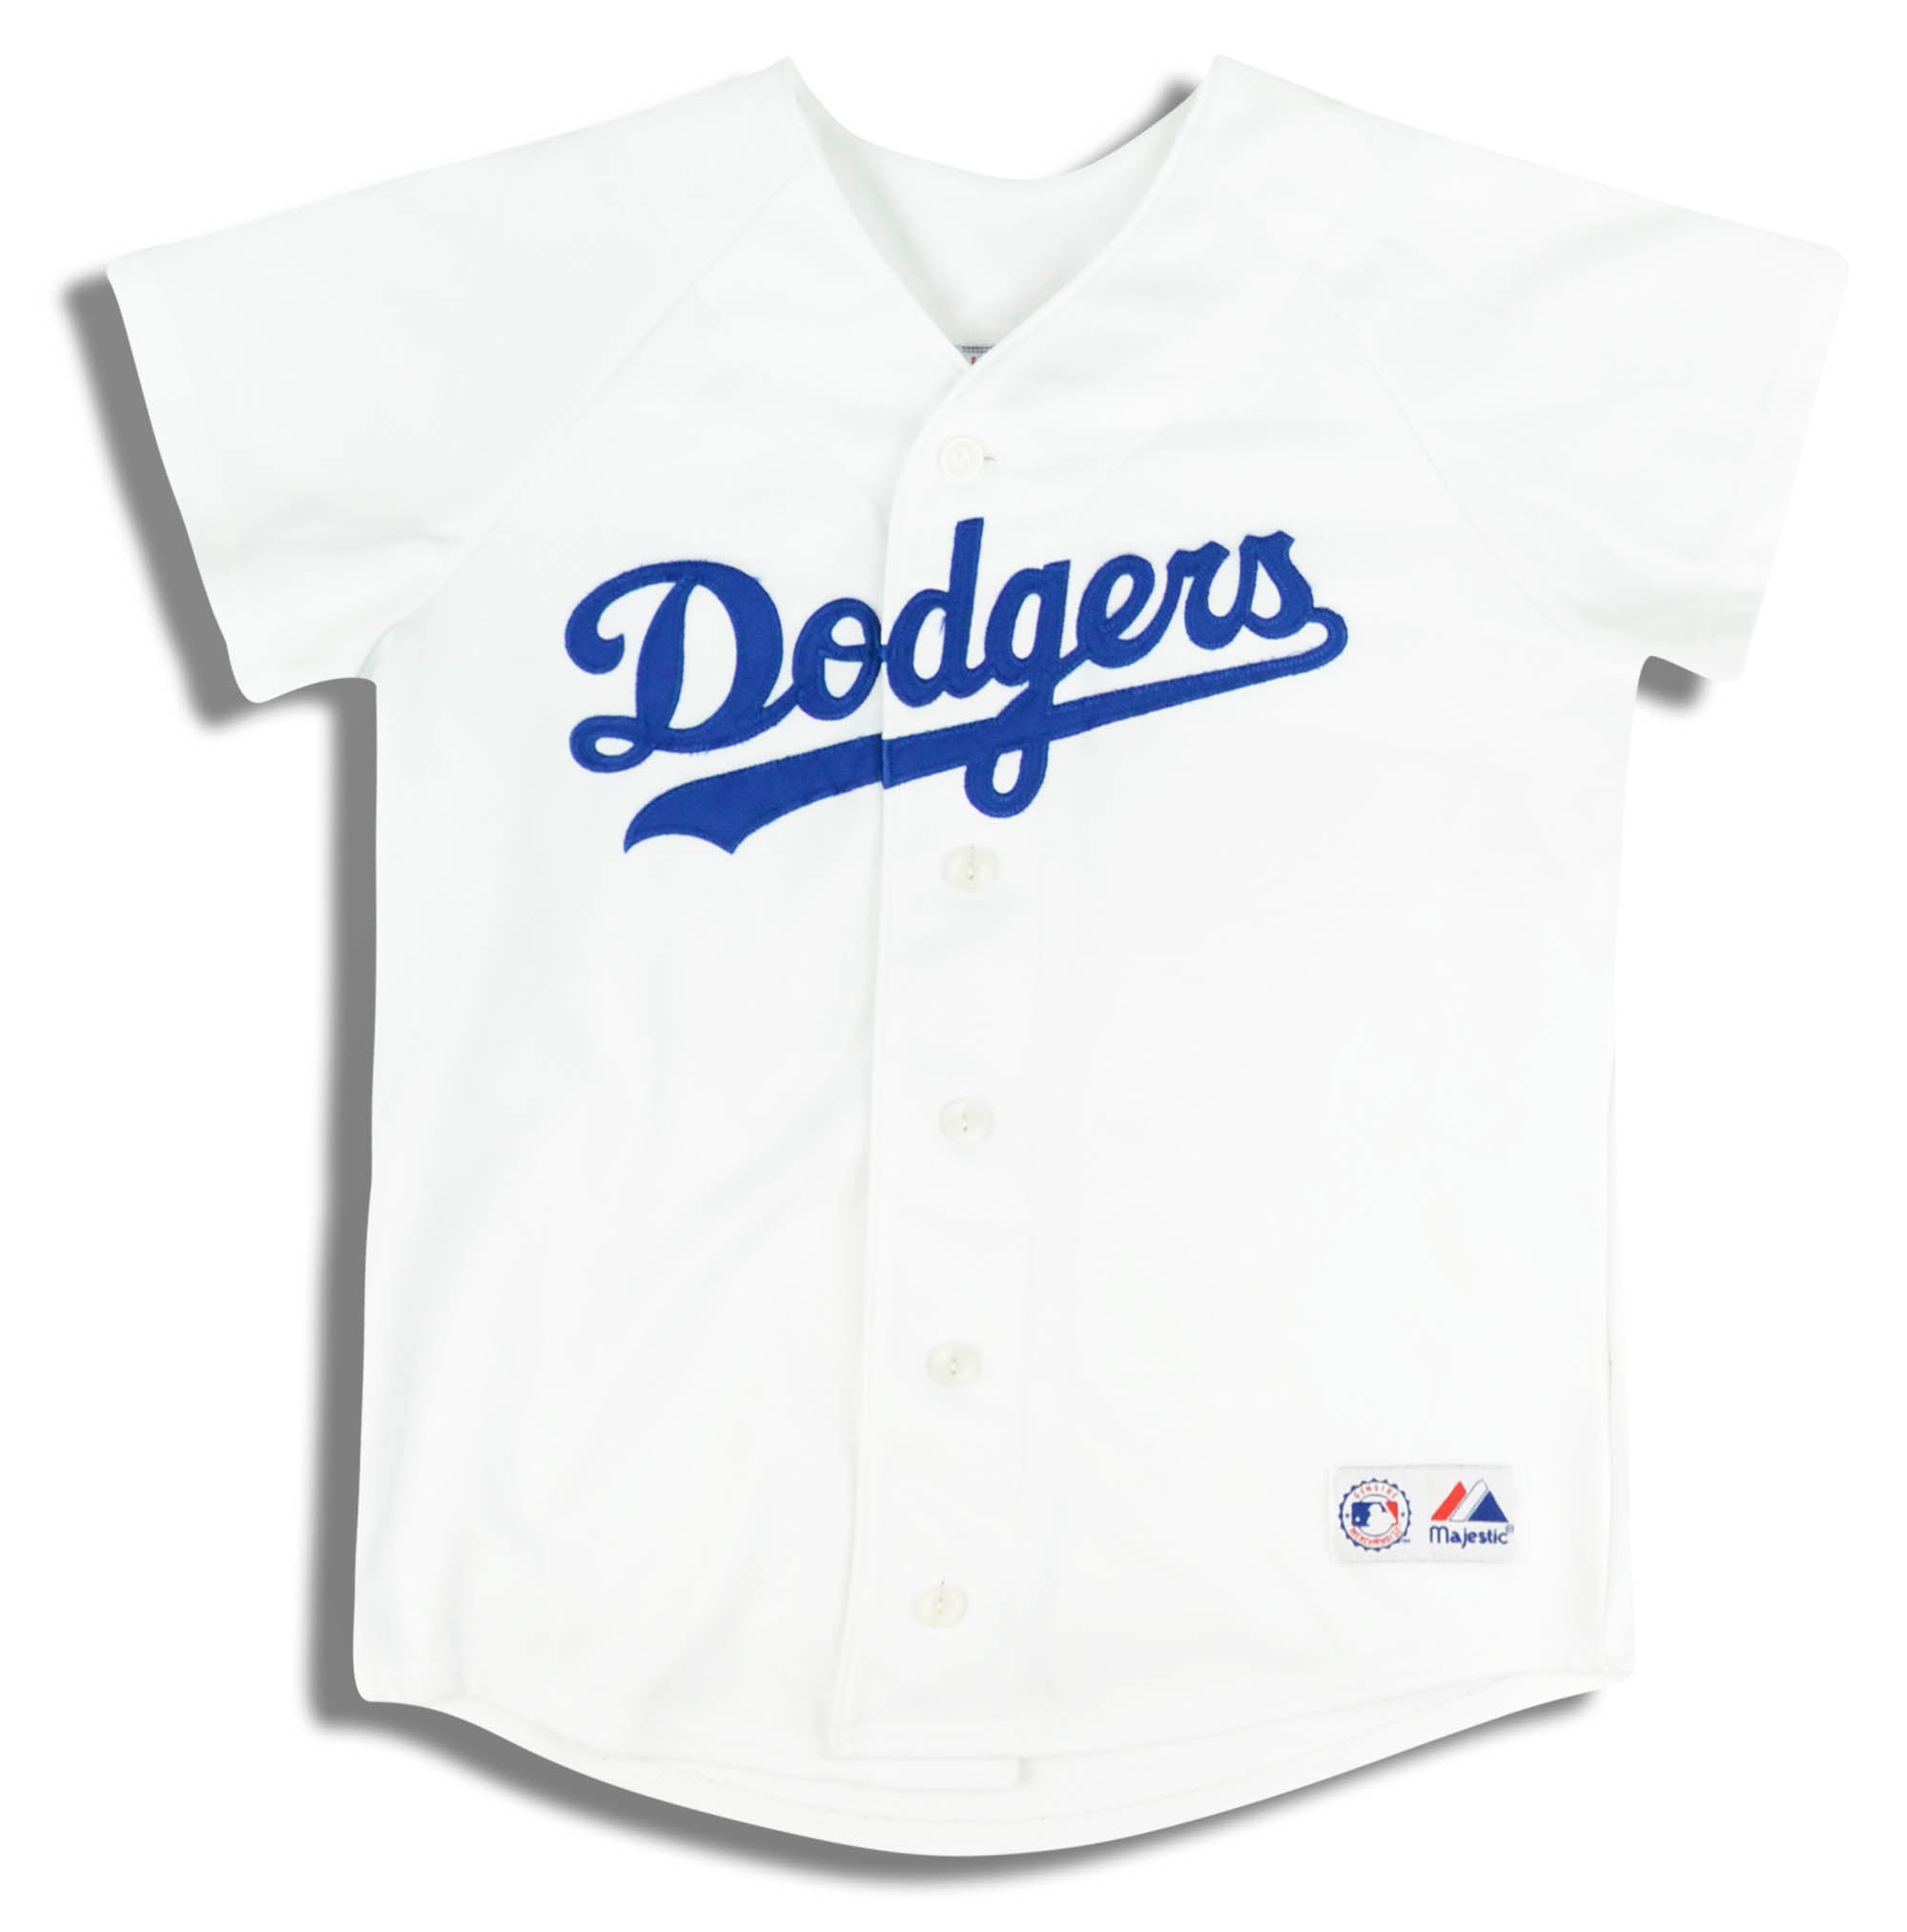 La Dodgers Youth Home Jersey